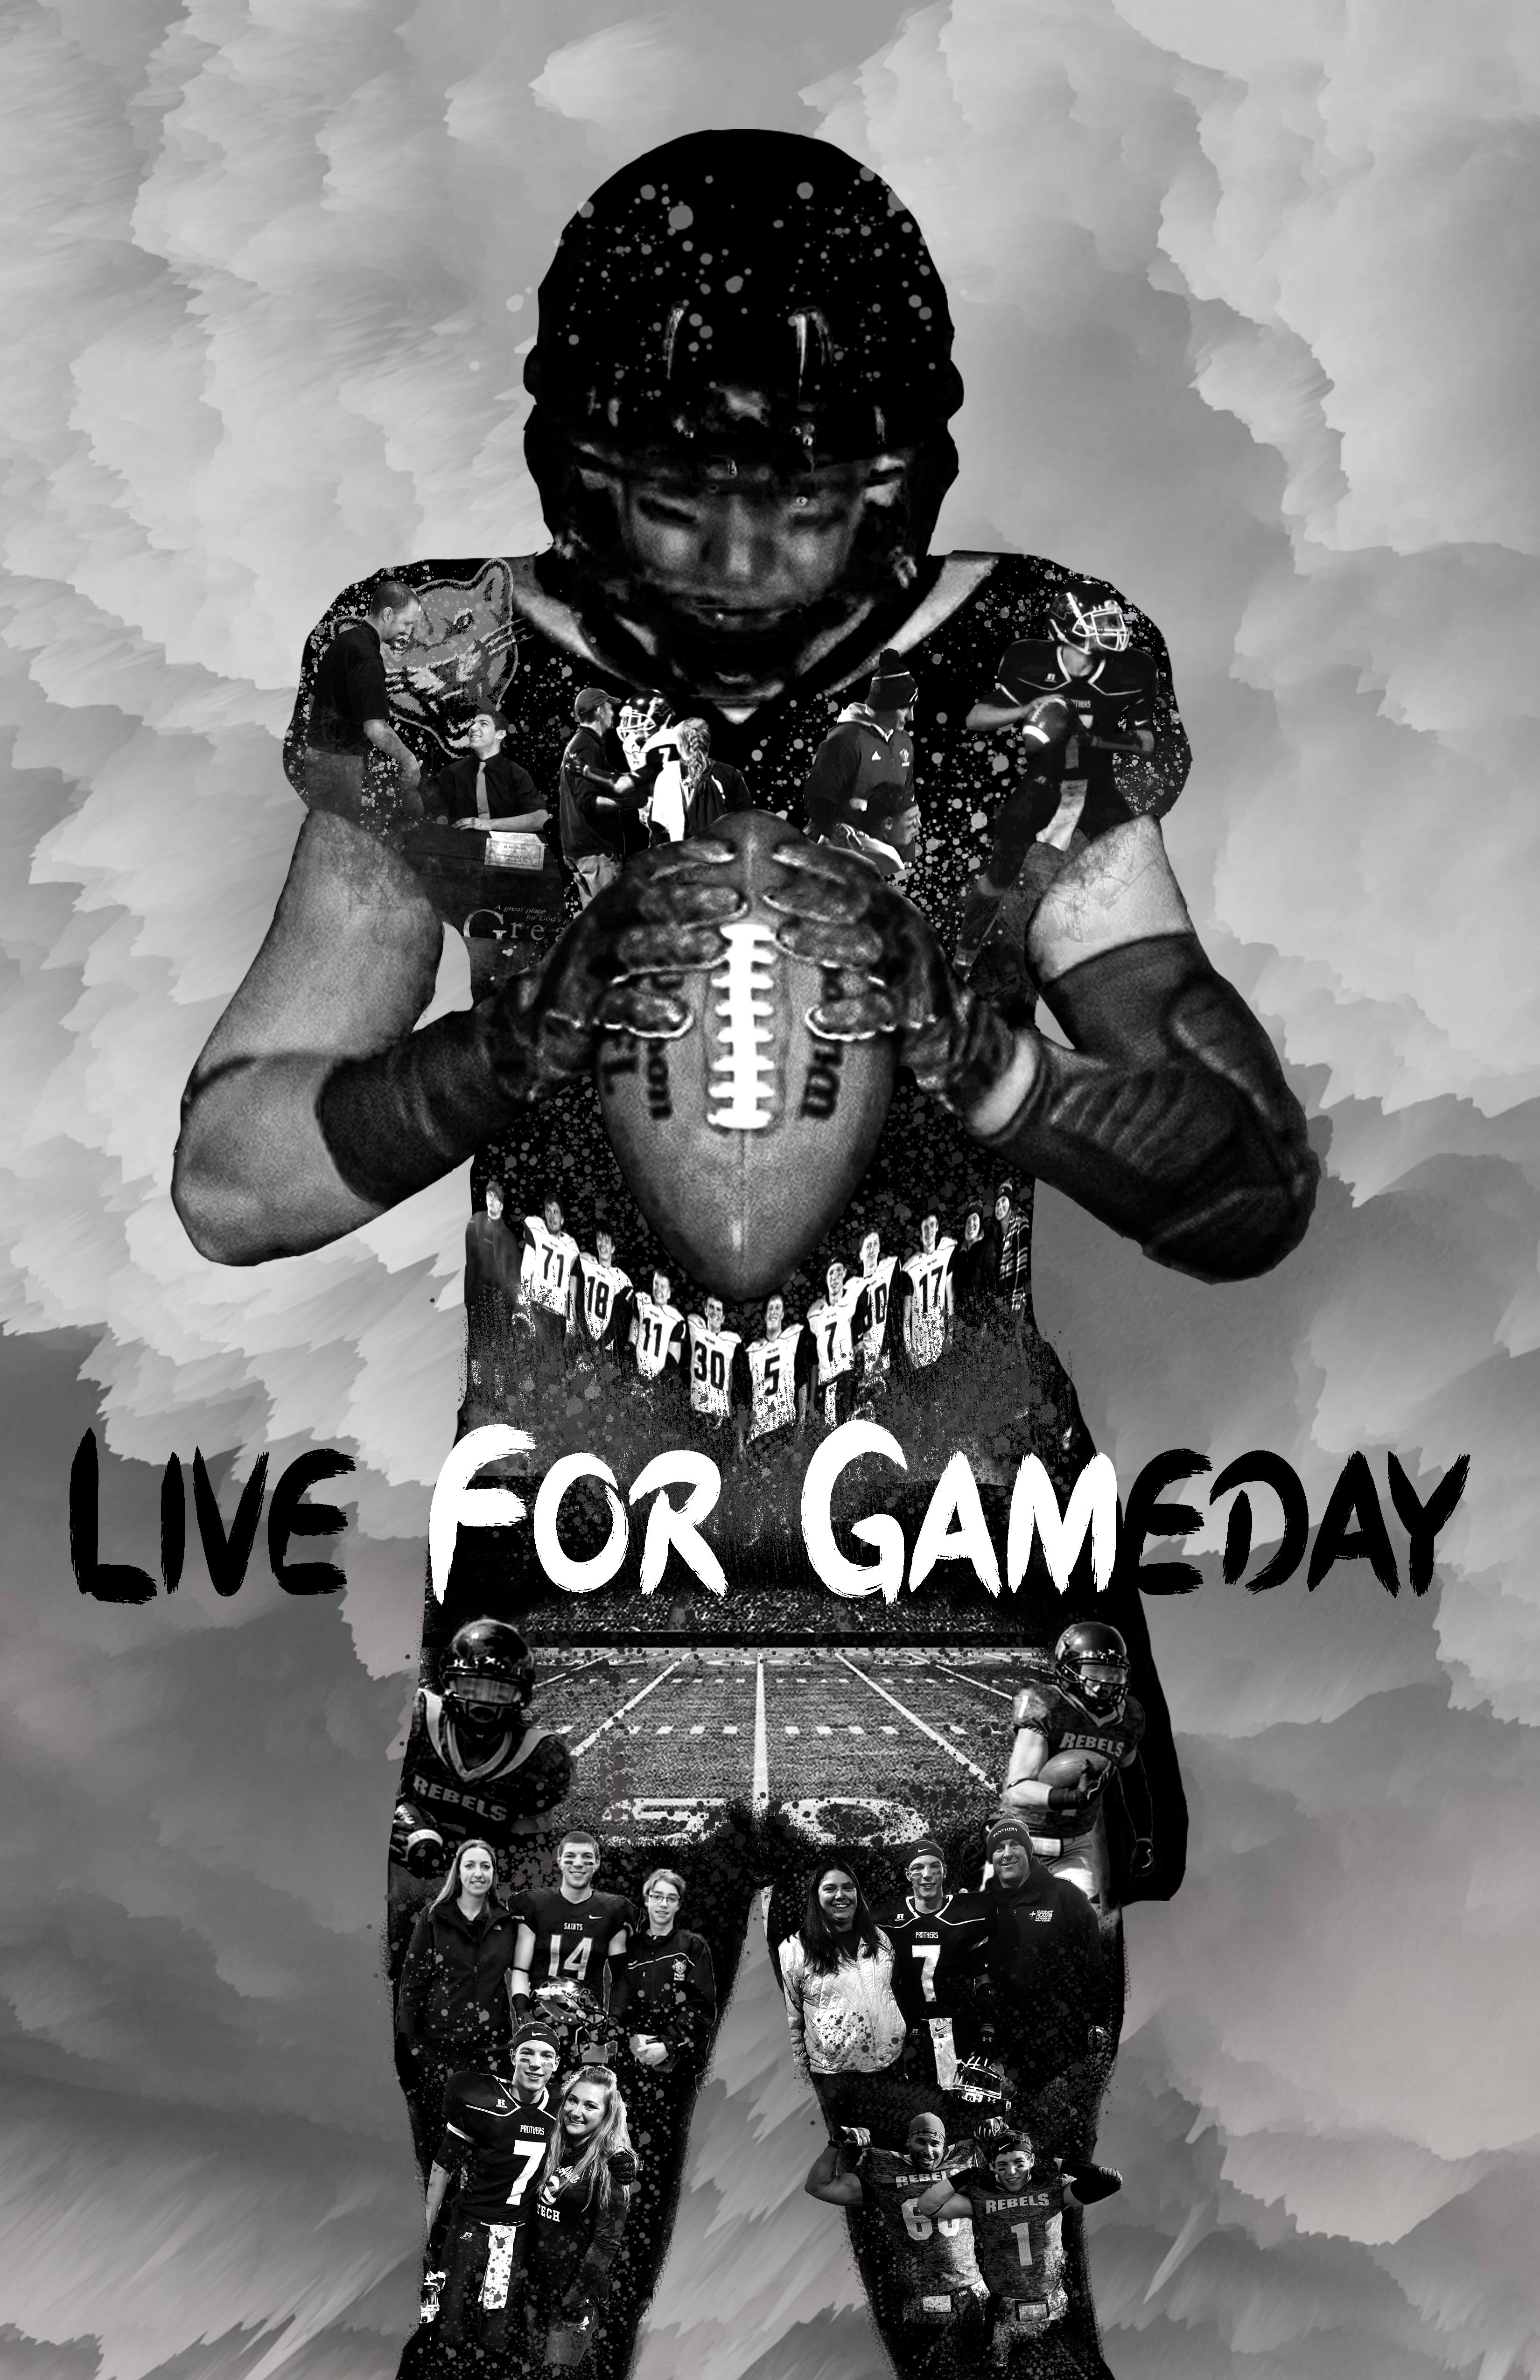 Live for Gameday Artwork by Duvall